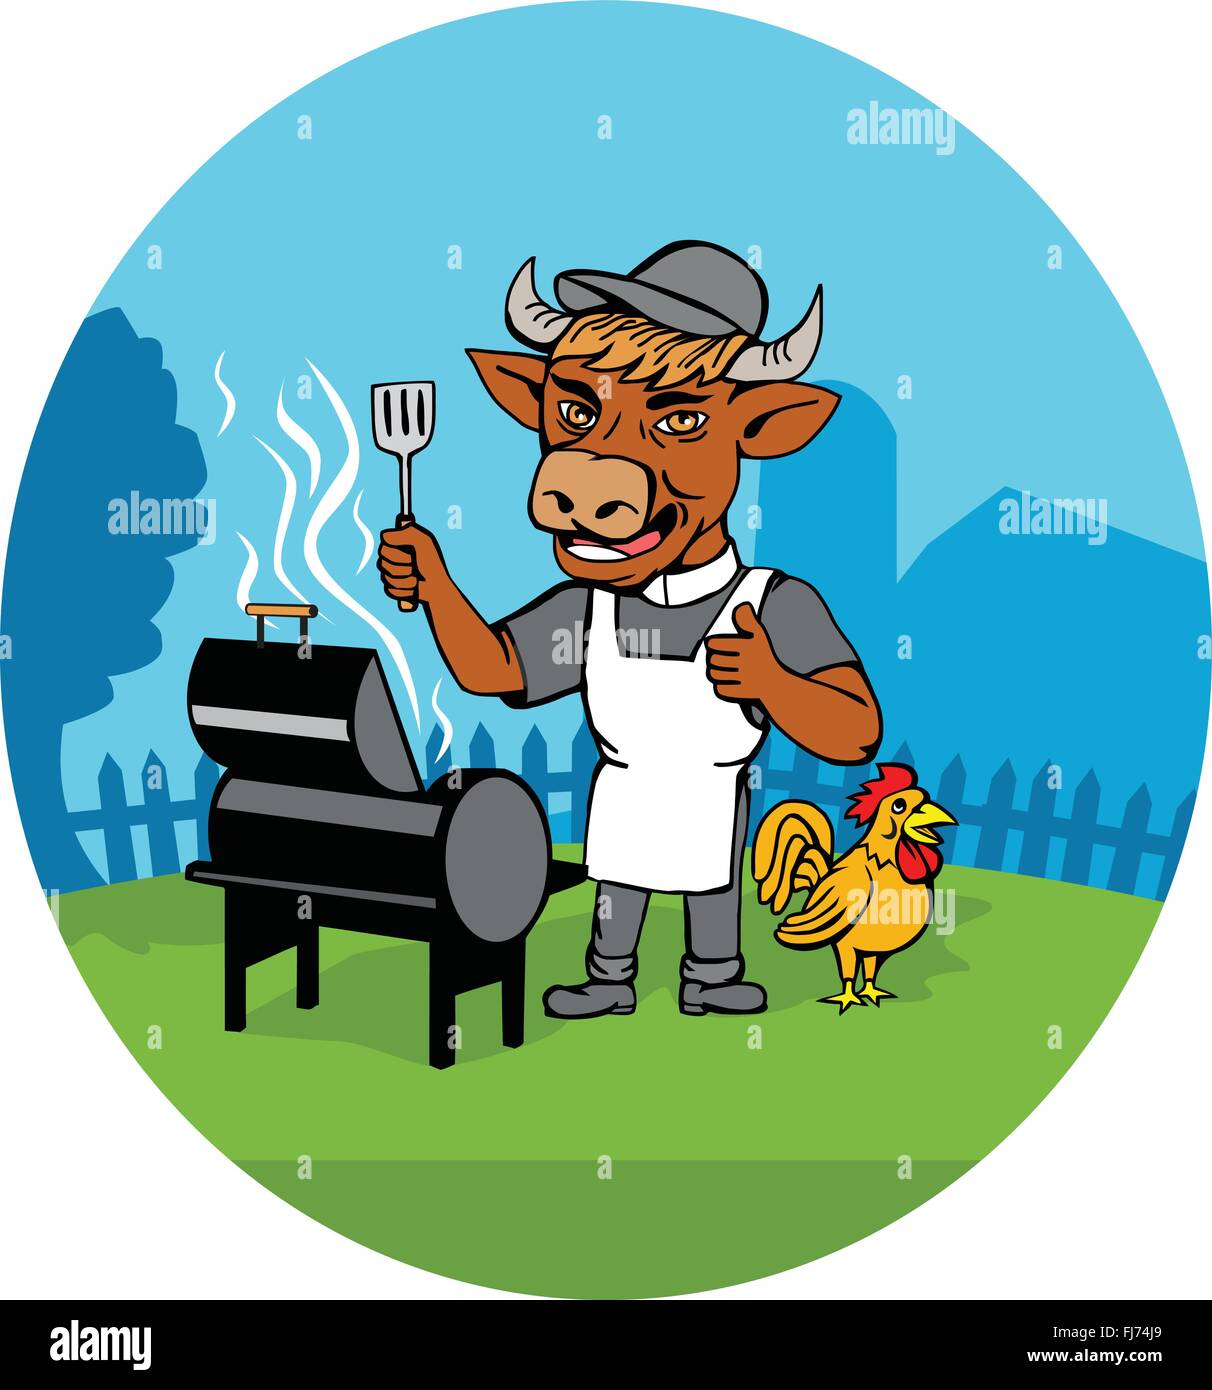 Illustration of a cow barbecue chef holding a spatula wearing a minister clerical collar, hat and apron with grill or smoker and chicken rooster on side set inside oval shape done in caricature style. Stock Vector